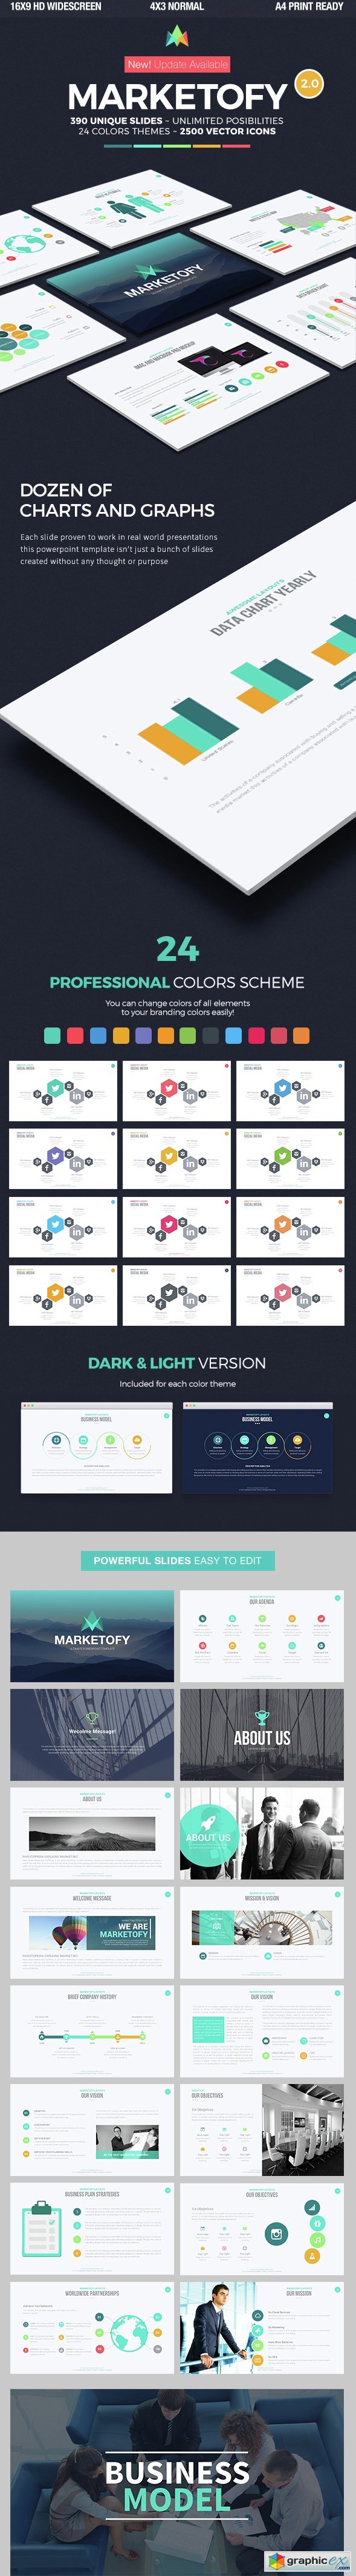 Marketofy - Ultimate PowerPoint Template